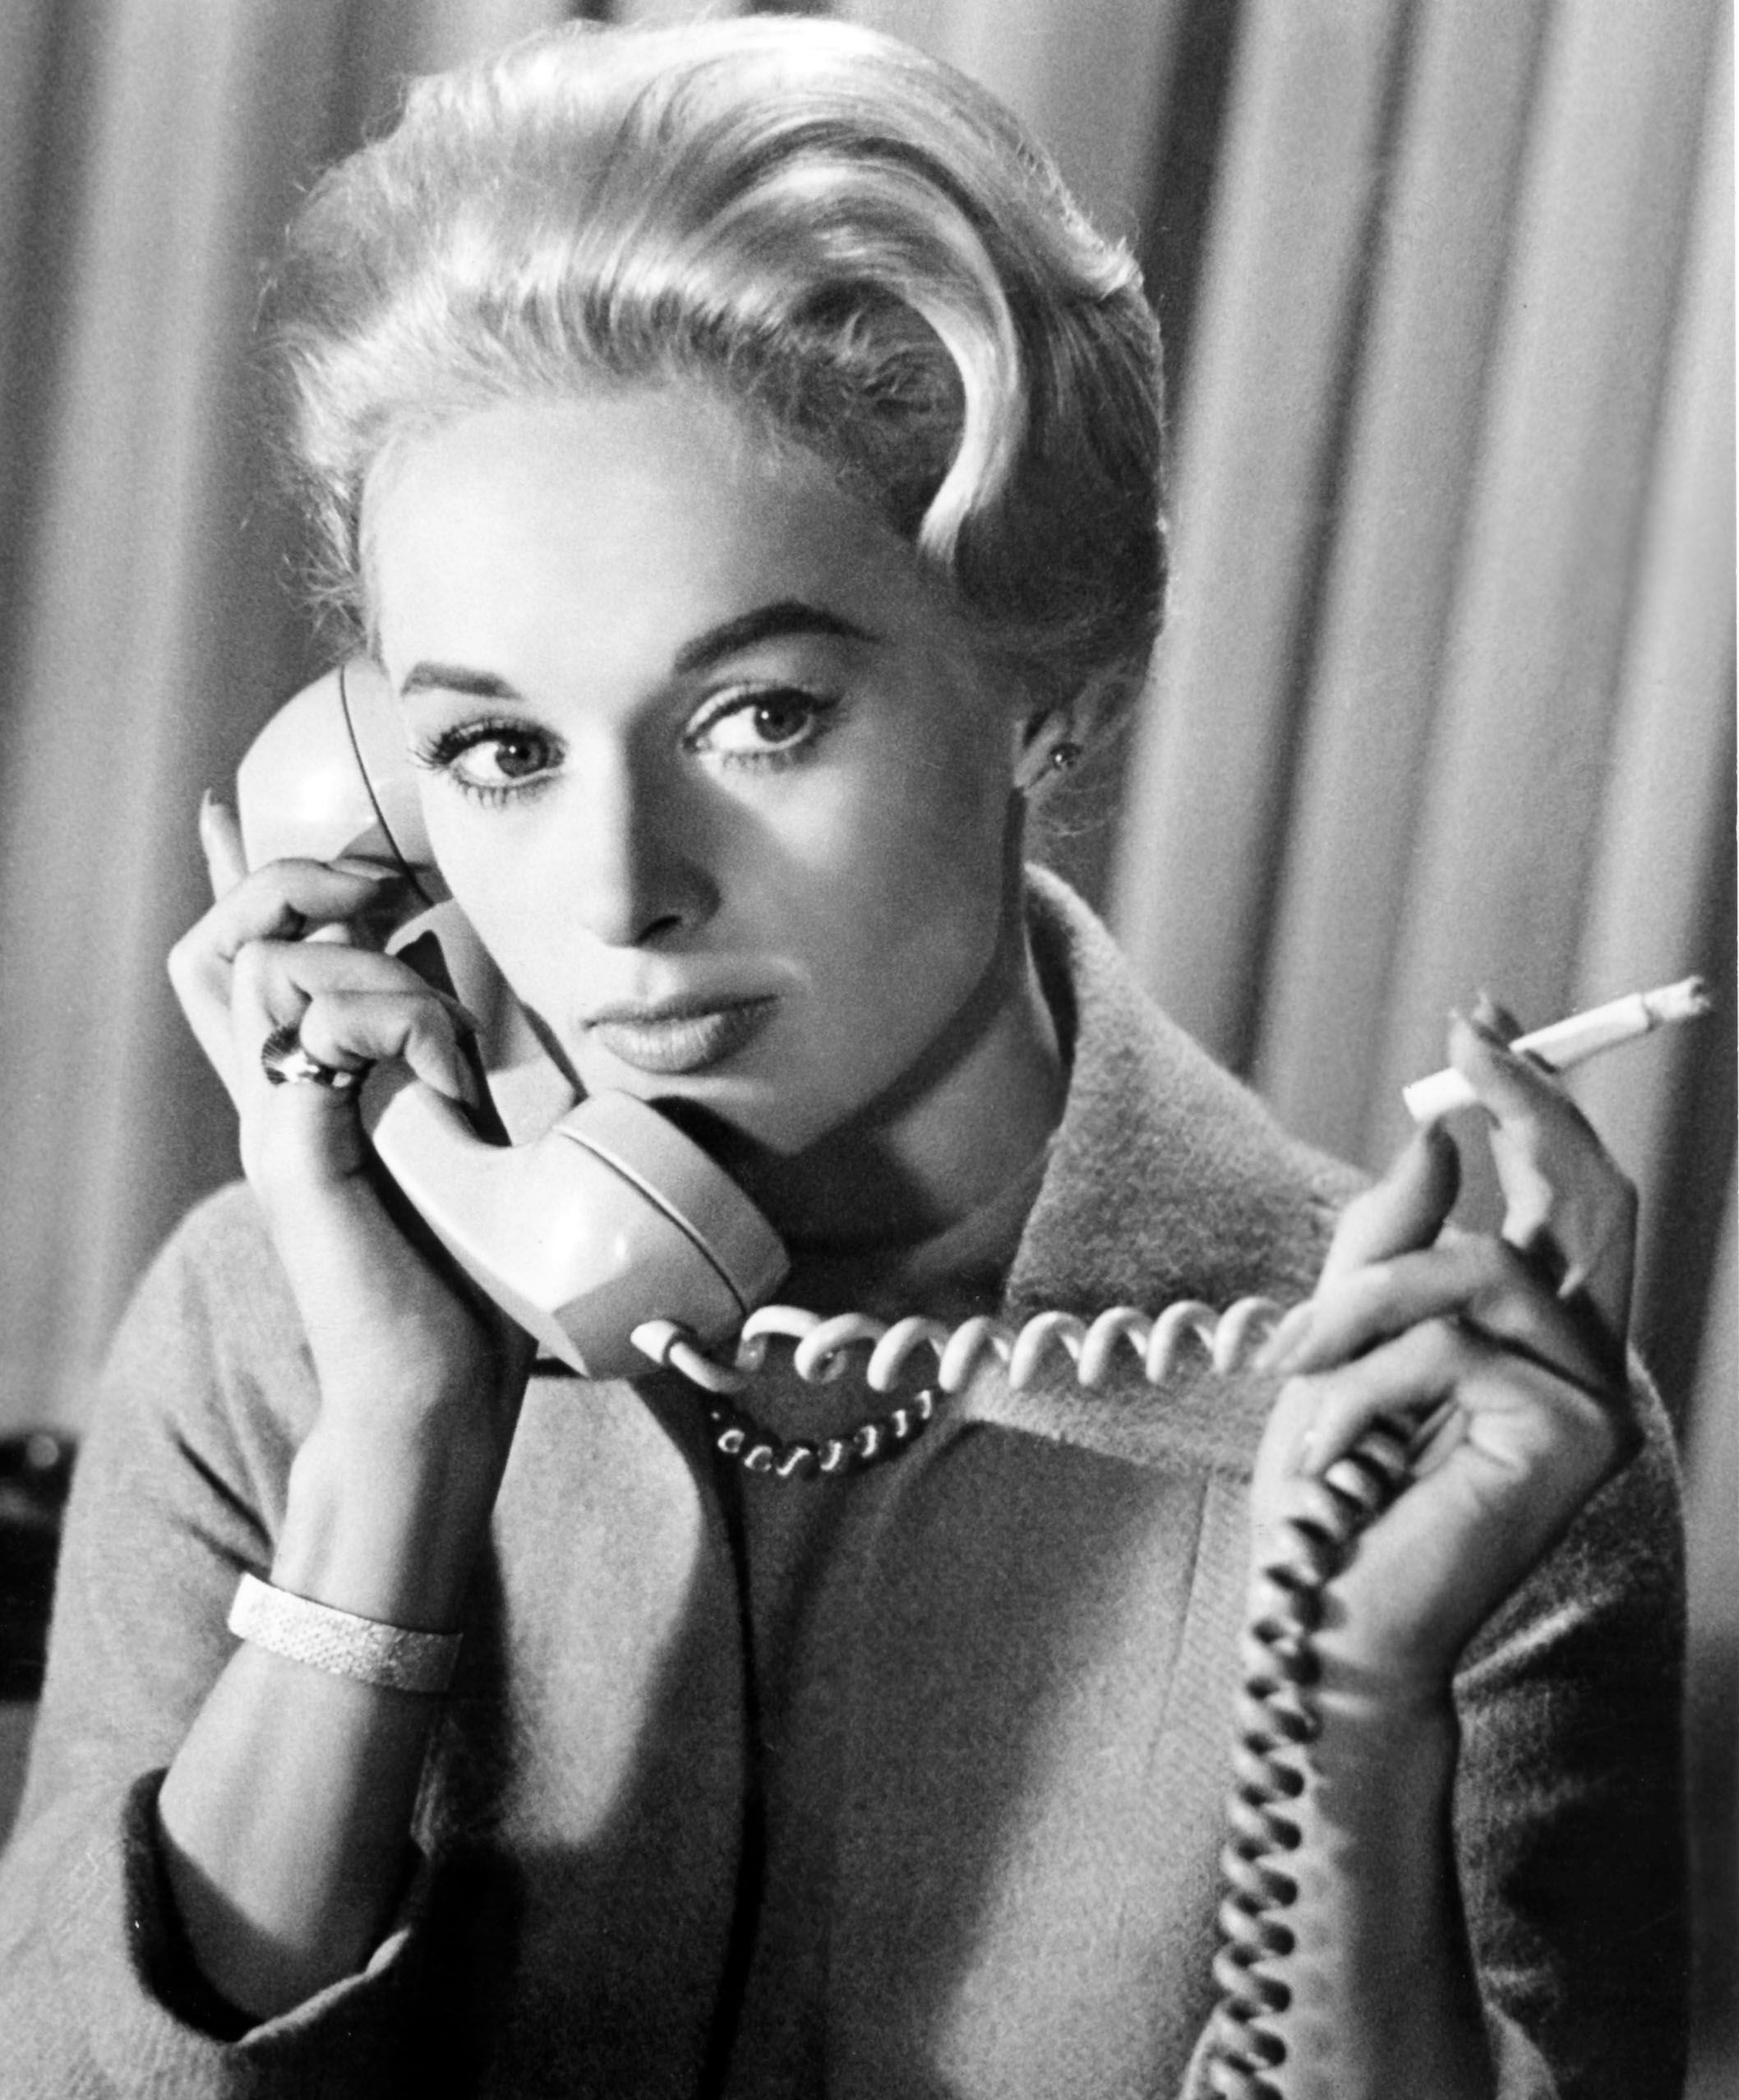 Tippi Hedren receives phone call in a scene from the film 'The Birds', 1963. | Source: Getty Images